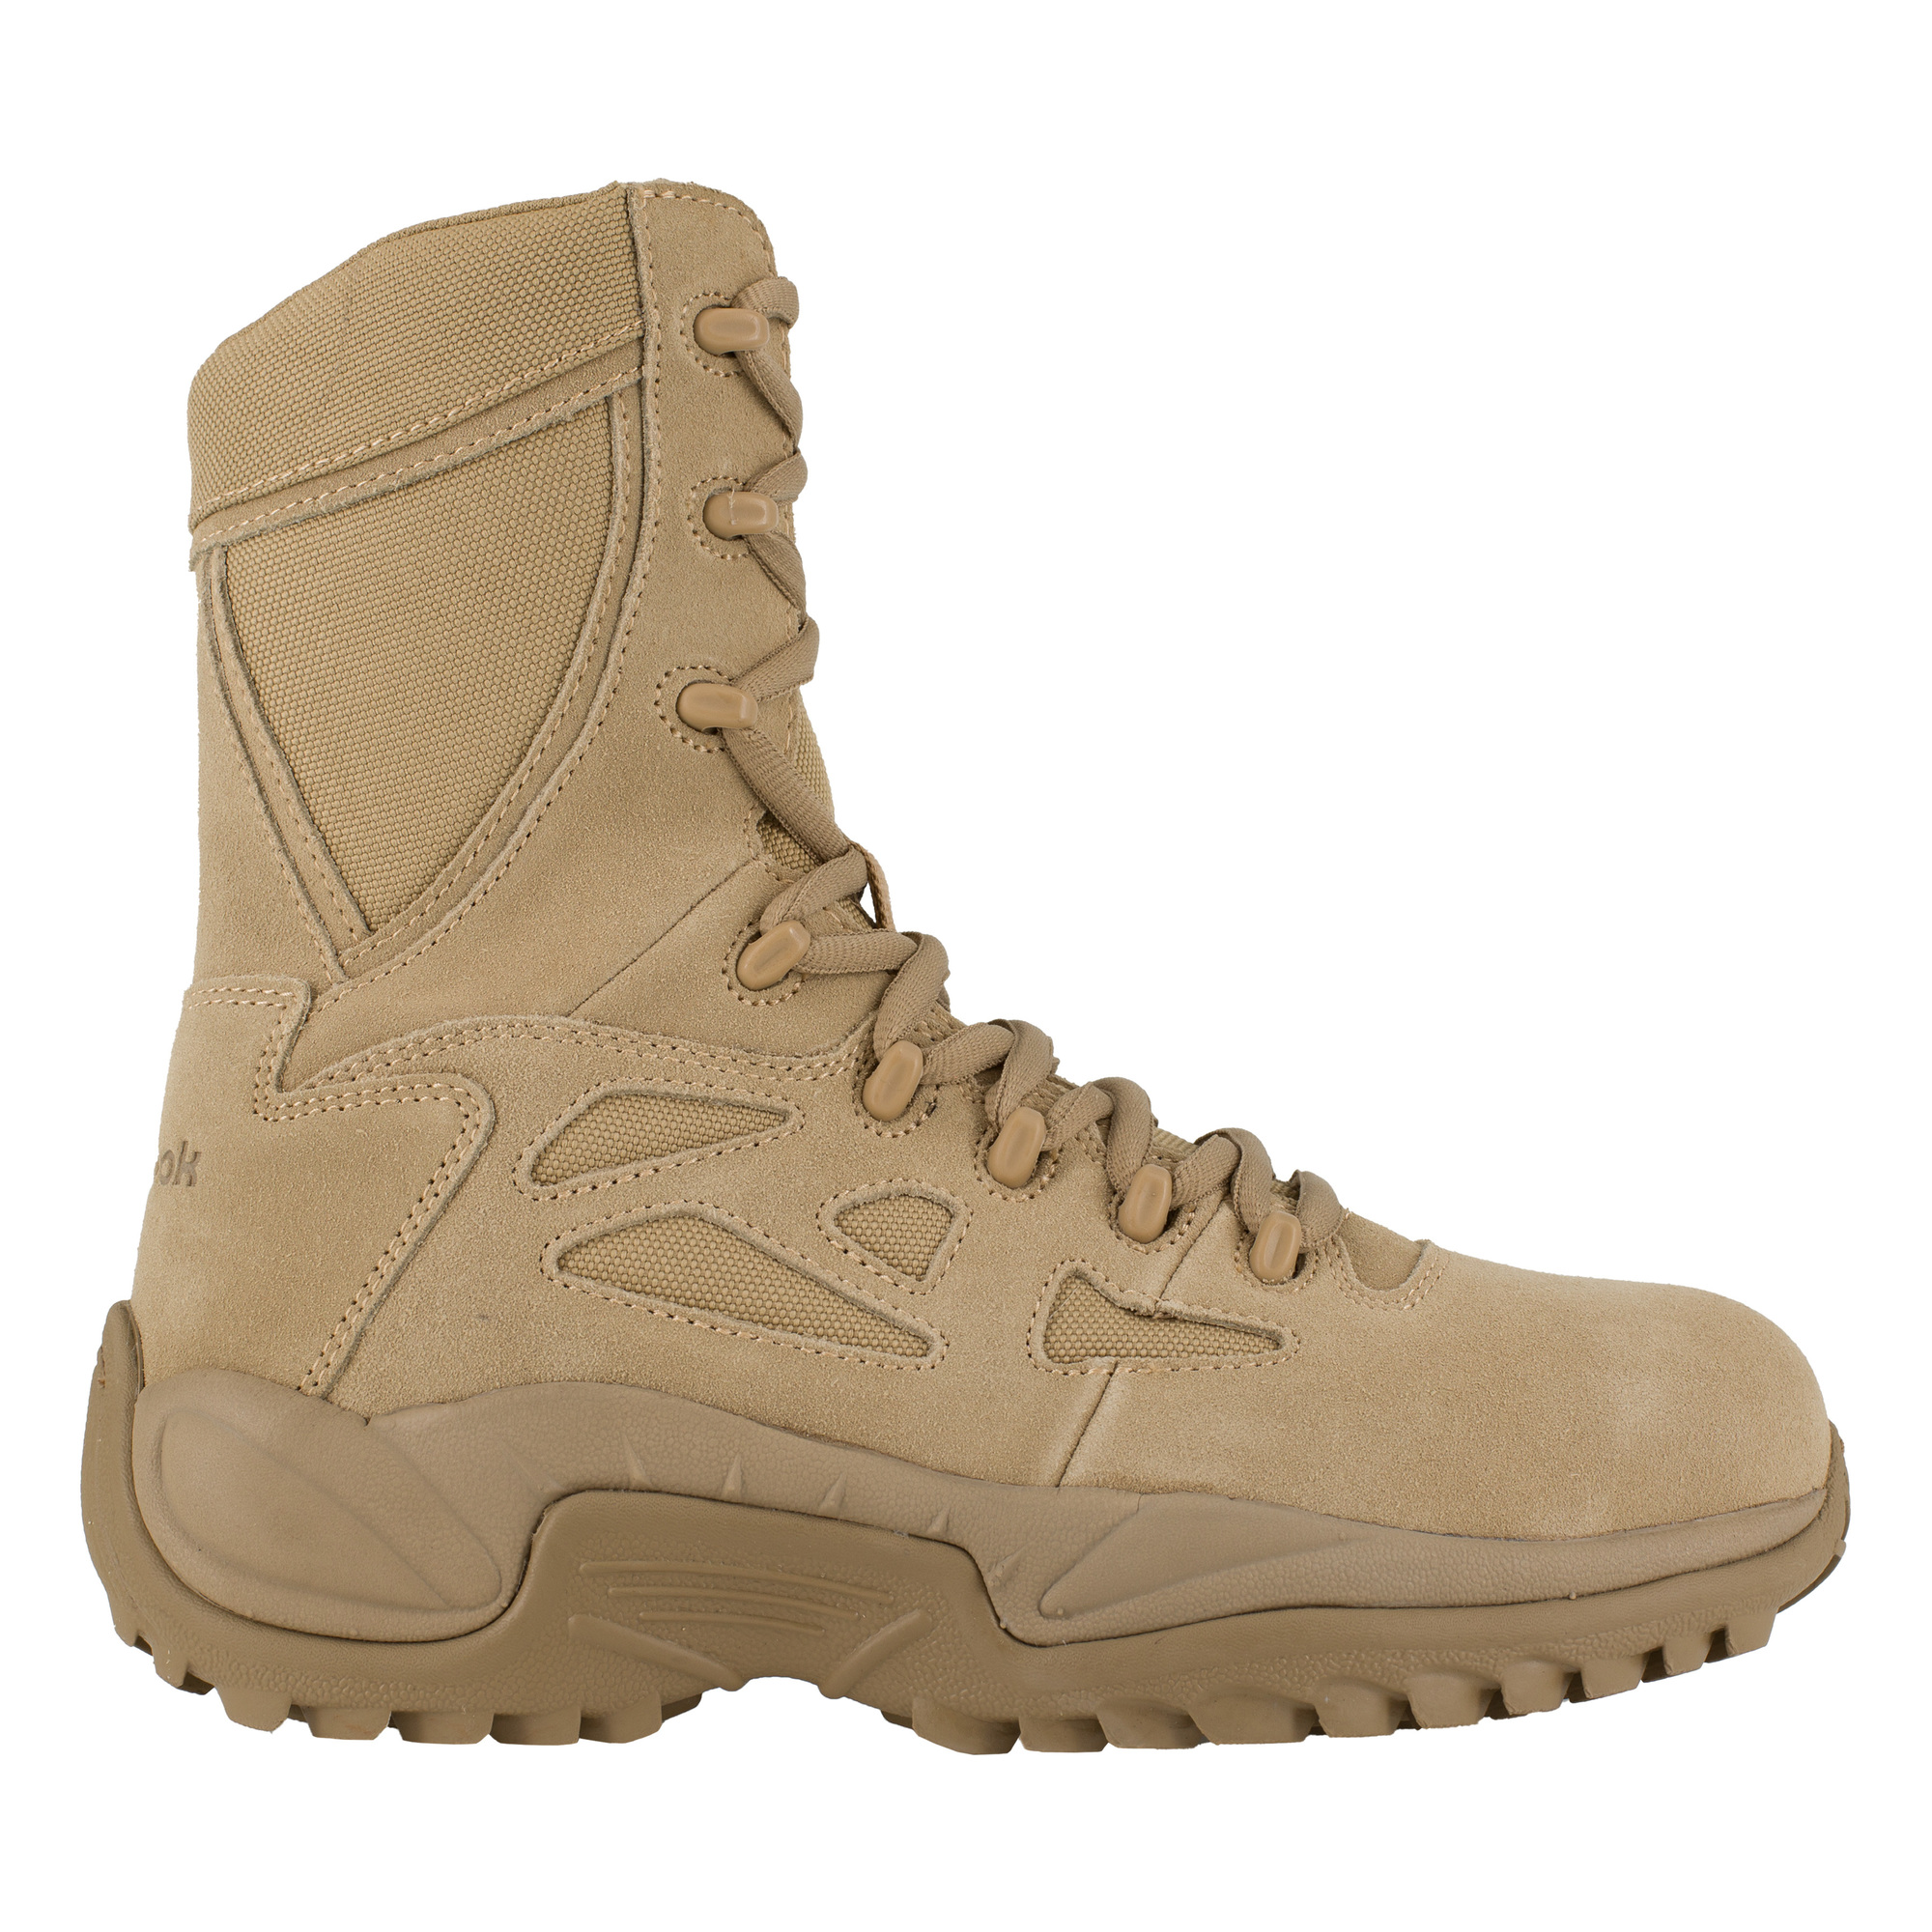 Reebok, 8Inch Stealth Tactical Boot with Side Zipper, Size 10, Width Medium, Color Desert Tan, Model RB894 -  RB894-M-10.0